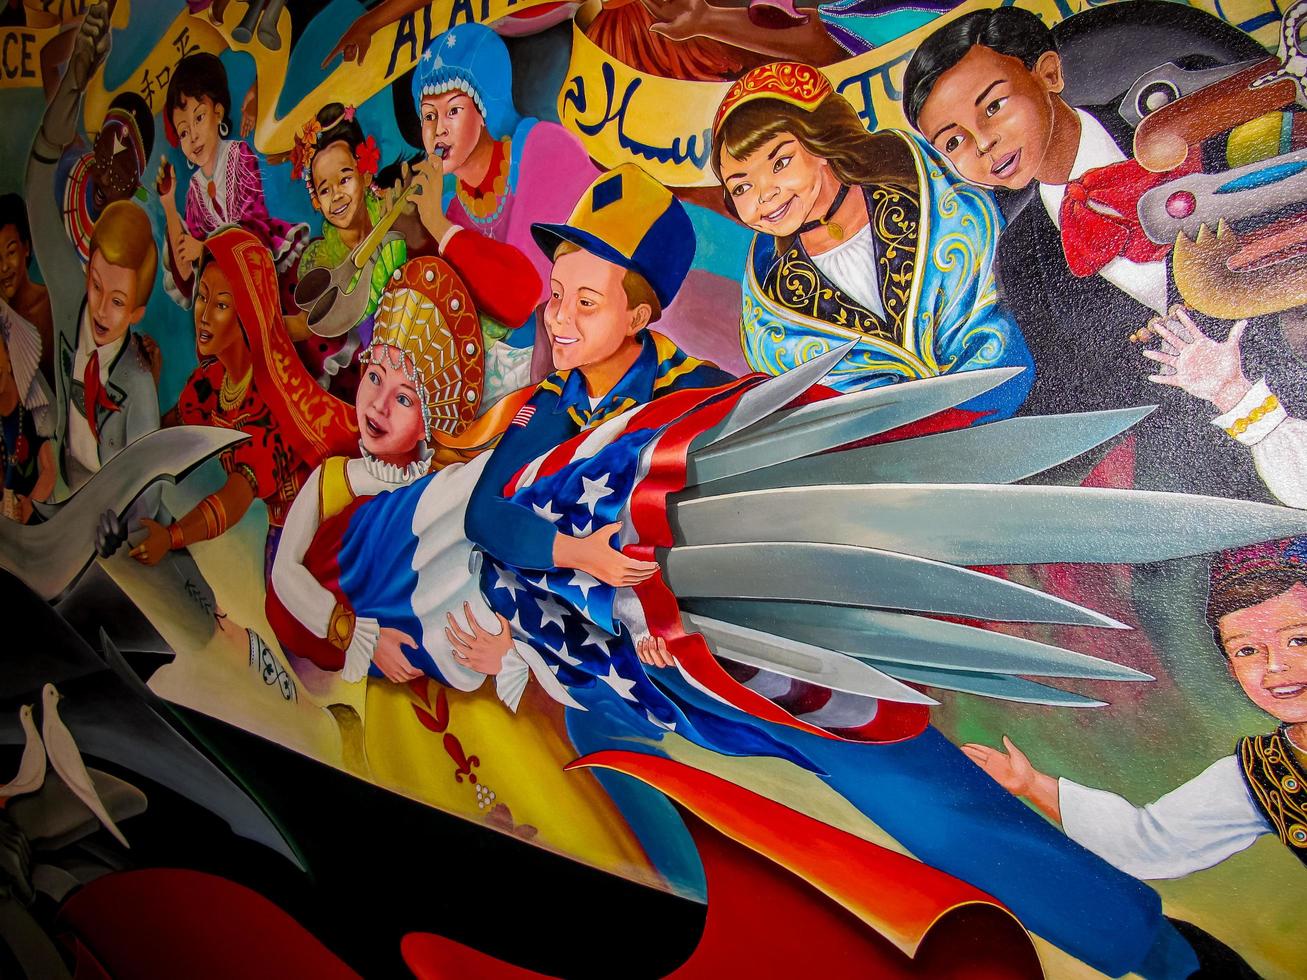 DENVER, USA, 2008 - Children of the World Dream of Peace mural by Leo Tanguma at Denver International airport. DIA's Art Collection was honored for ten best airports for public art in the US photo